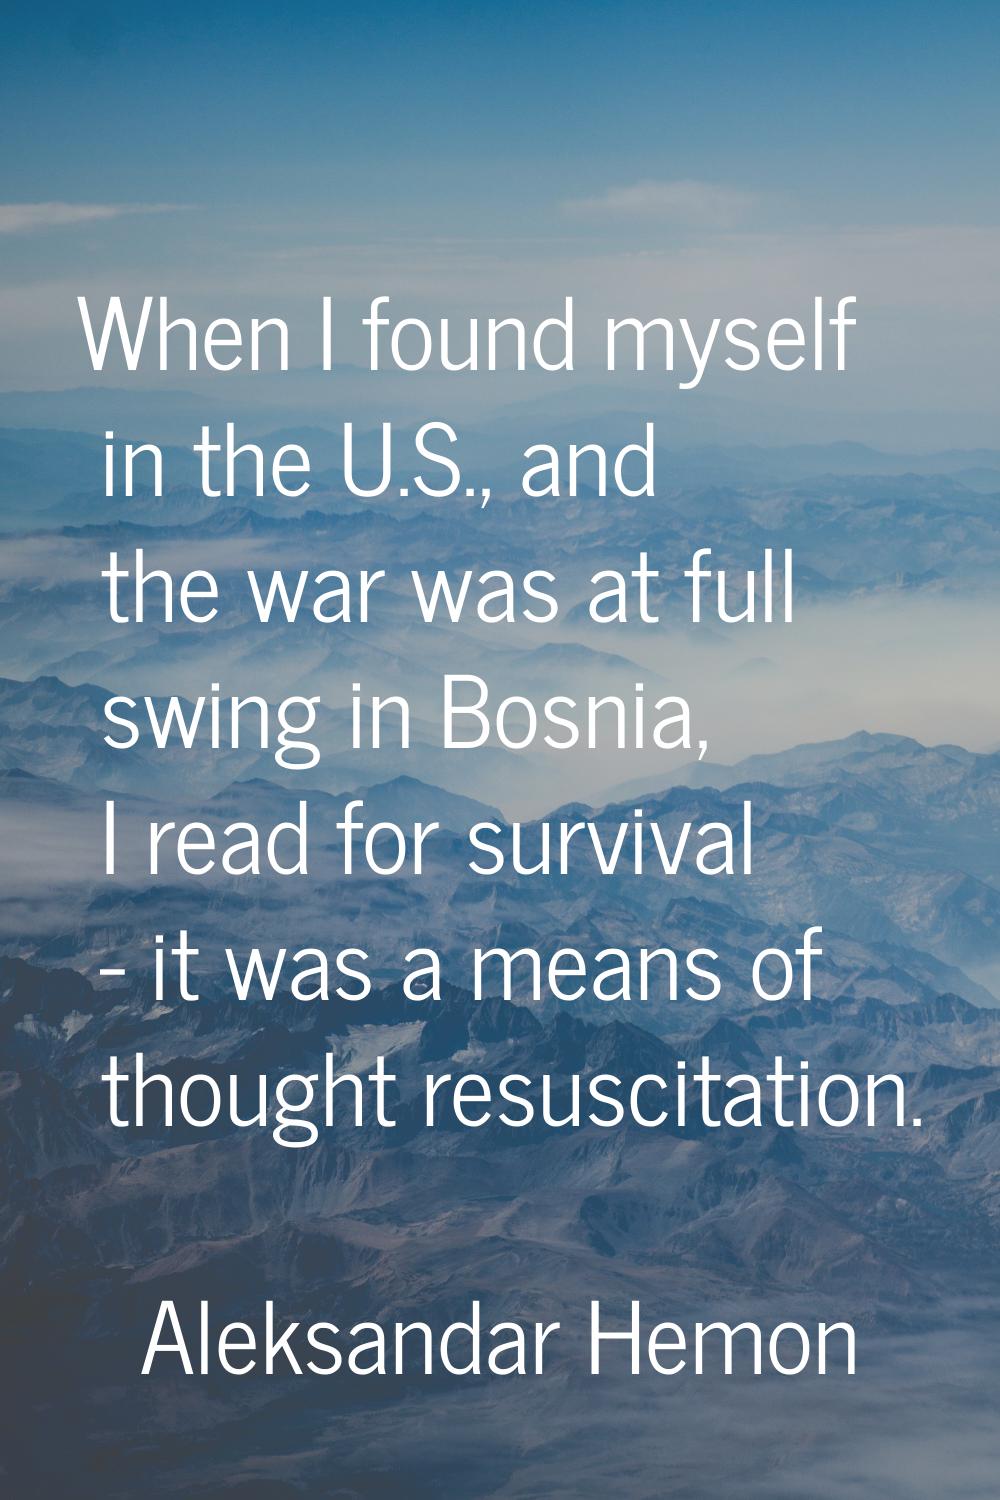 When I found myself in the U.S., and the war was at full swing in Bosnia, I read for survival - it 